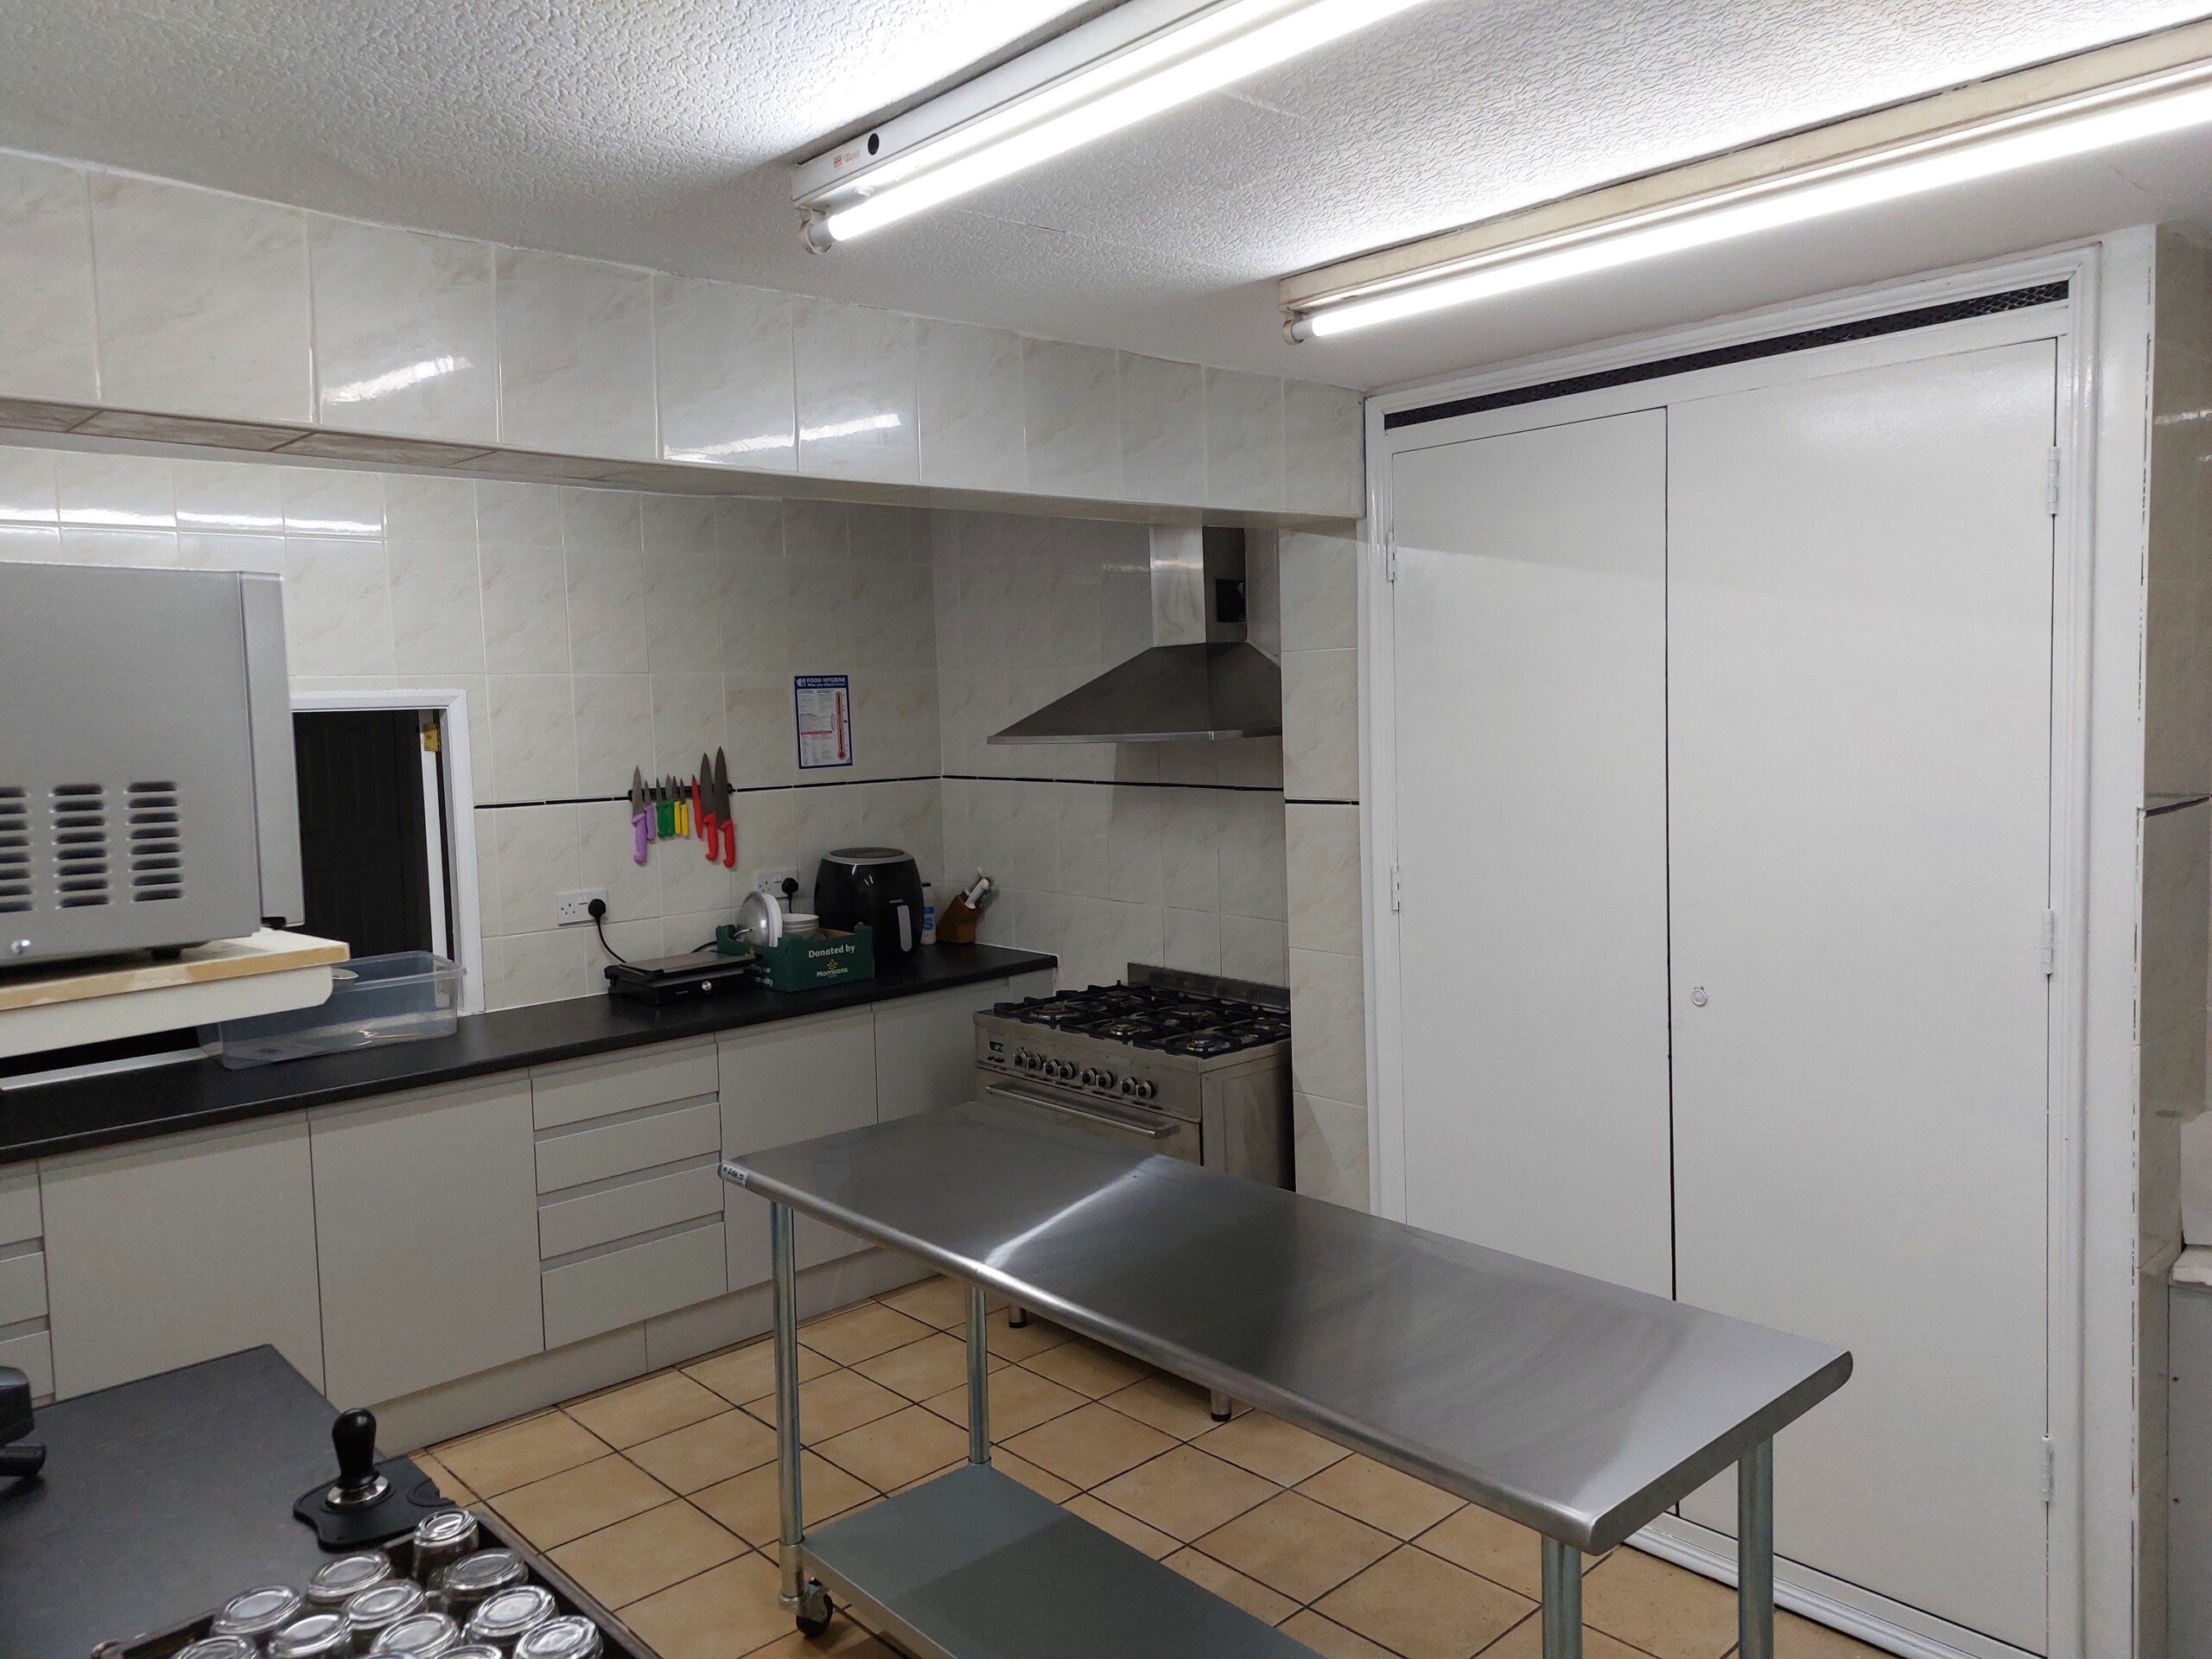 kitchen and youth space renovation for community impact in bolton